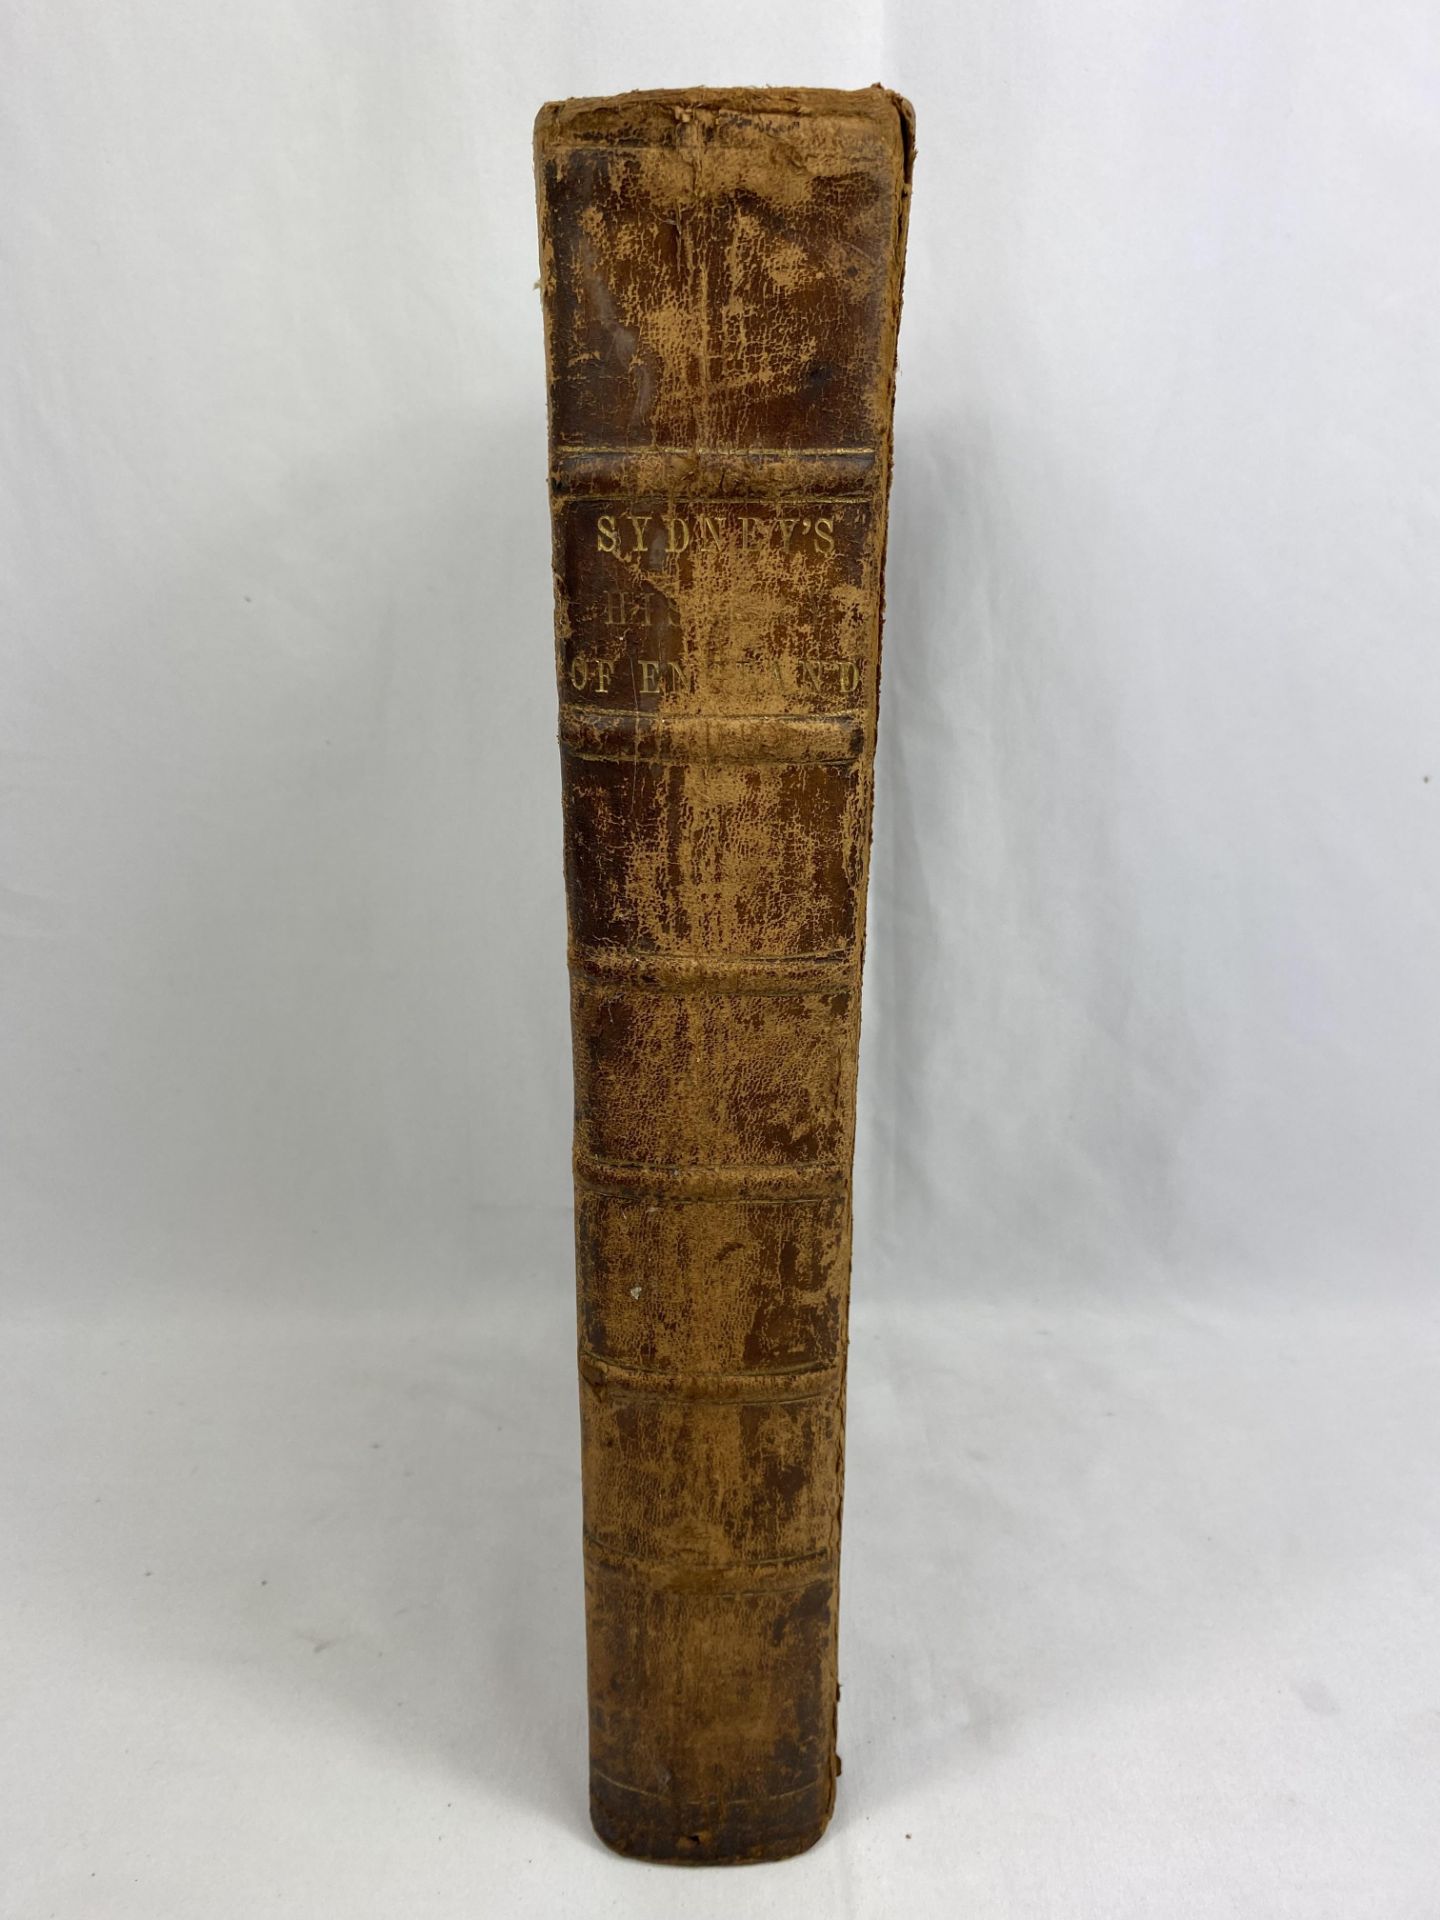 A New and Complete History of England by Temple Sydney, printed for J. Cooke 1773 - Image 6 of 6